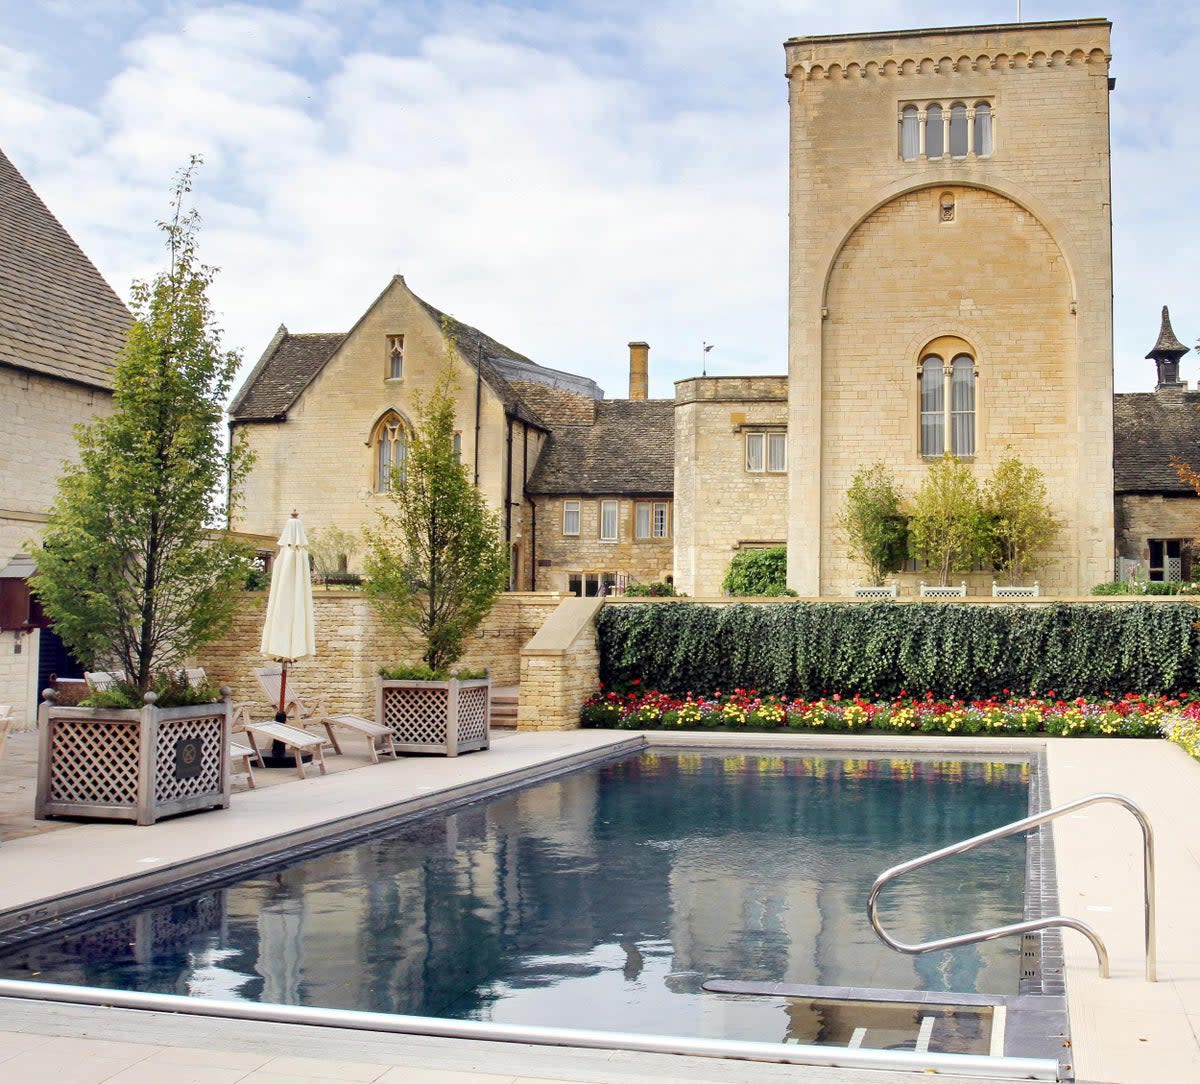 This grand hotel dates all the way back to the 15th century (Ellenborough Park)